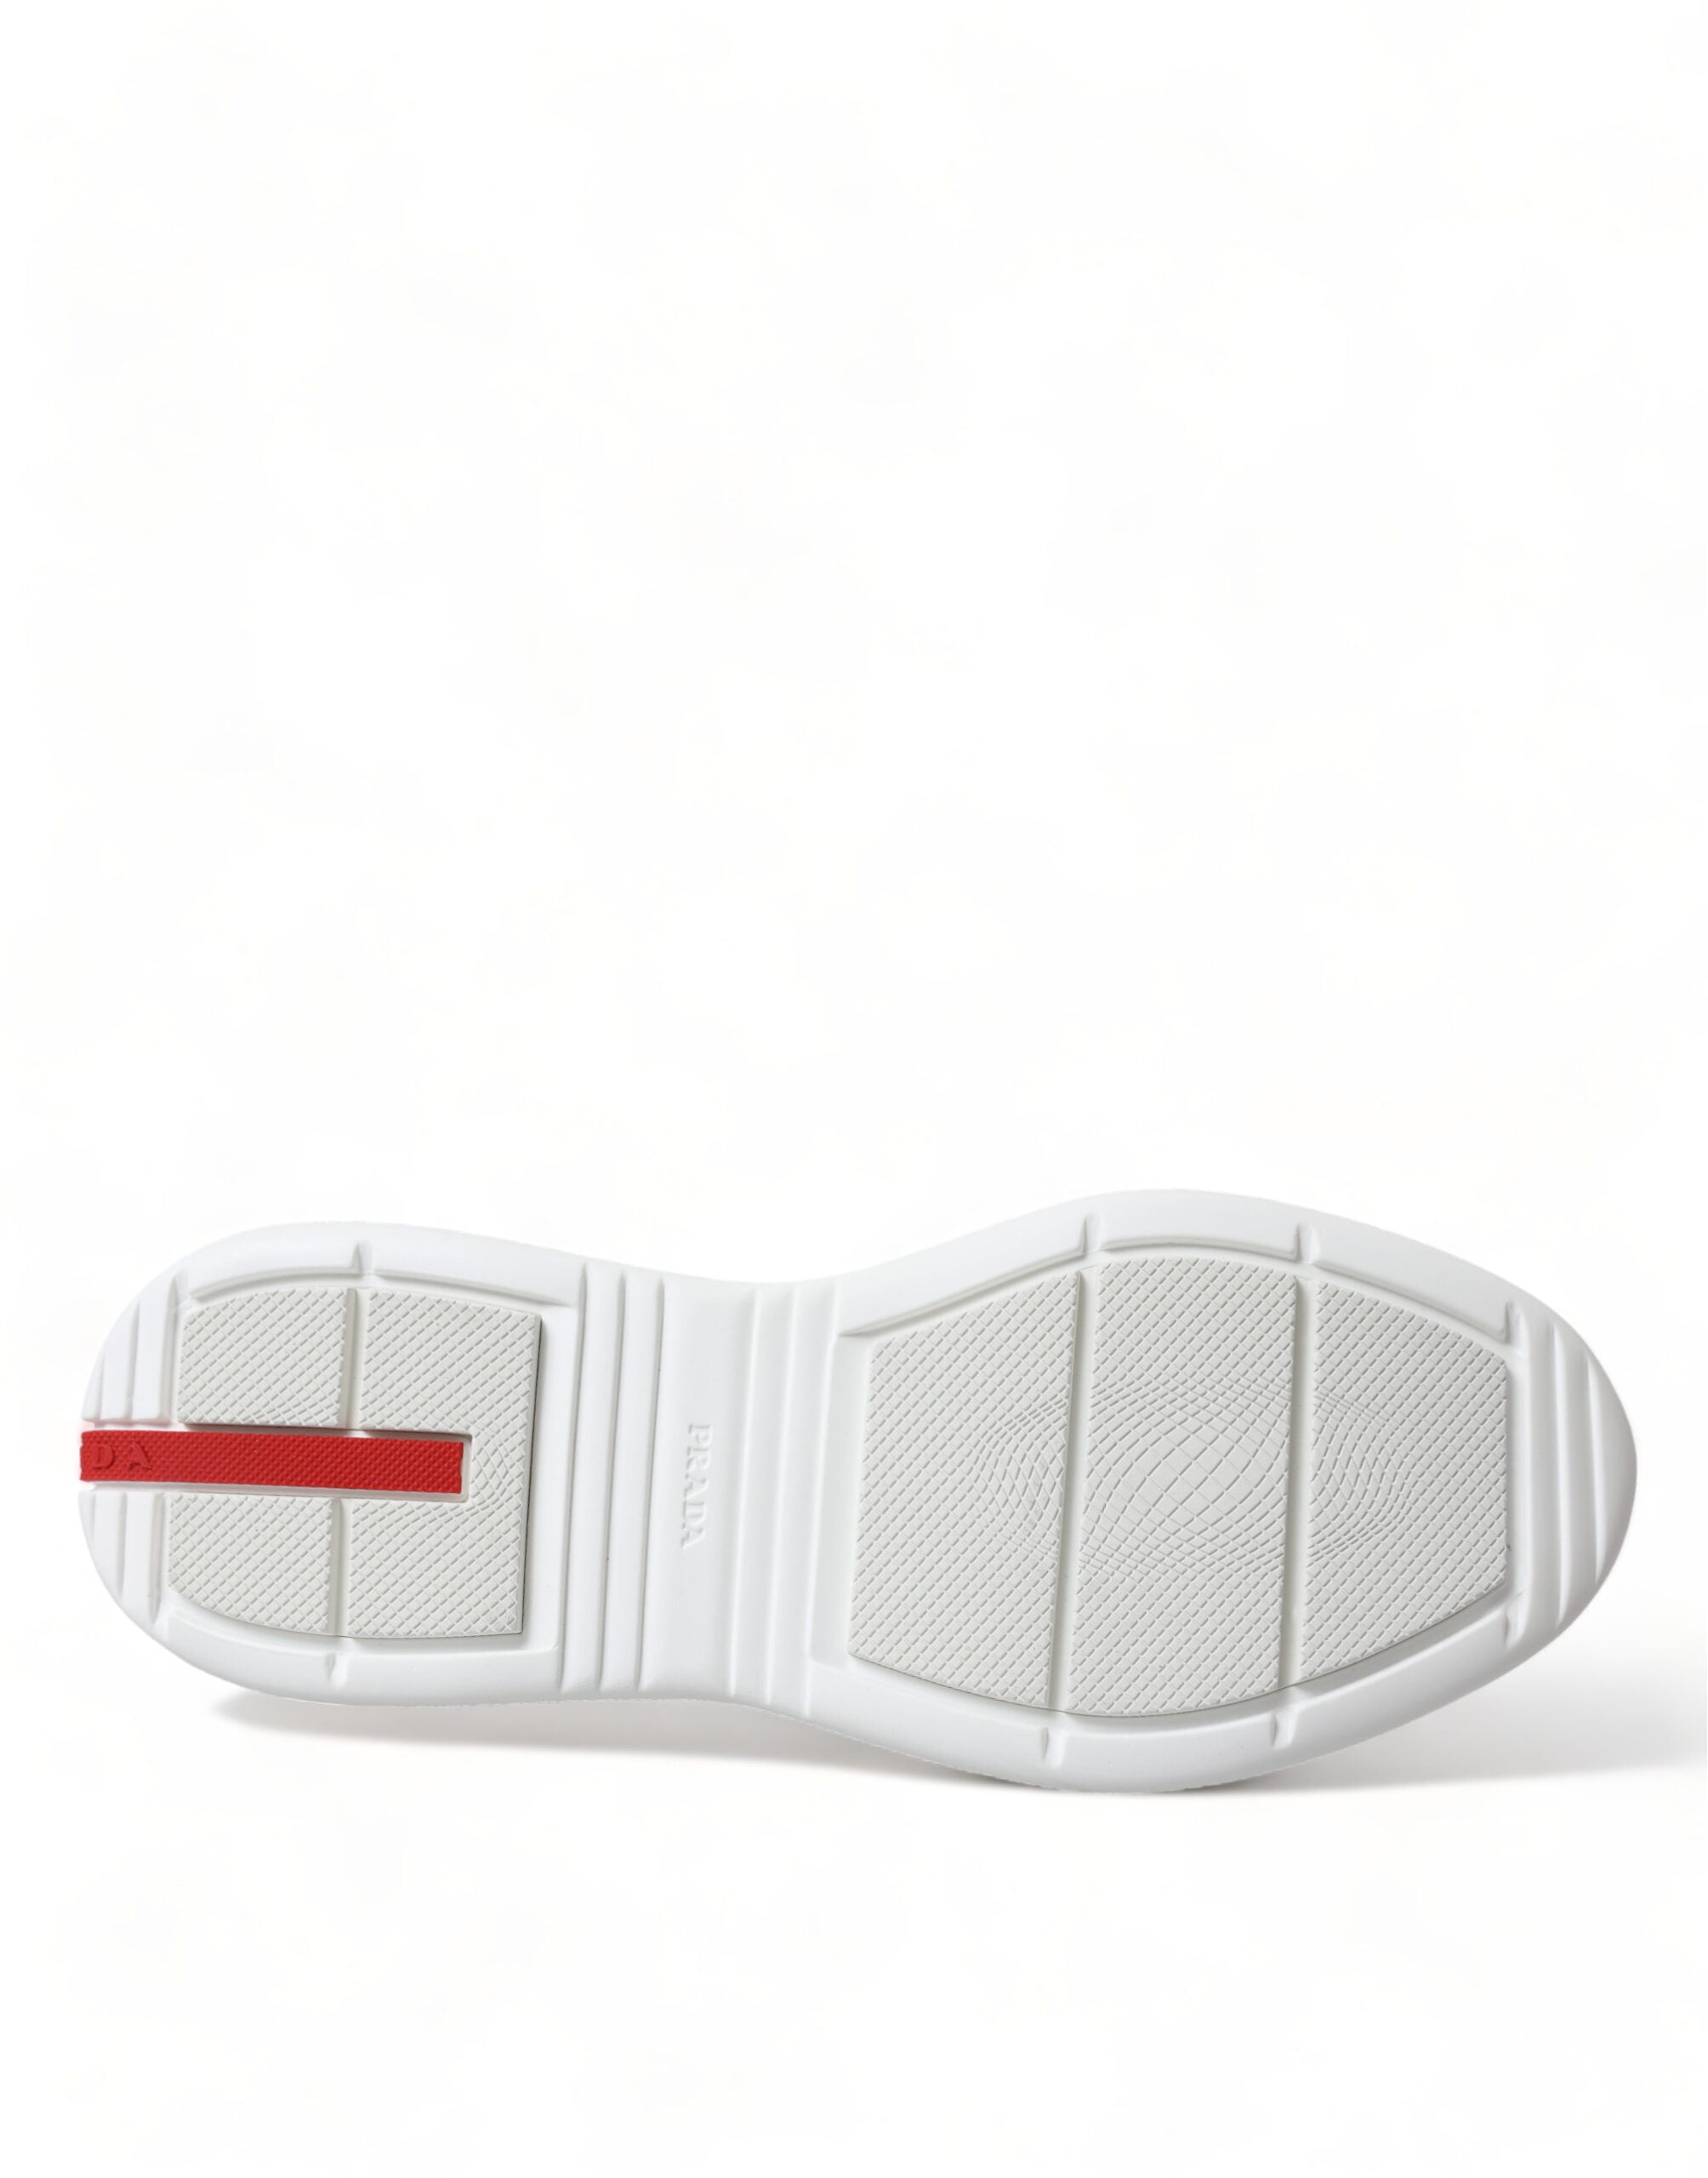 Prada Elevate Your Style with Sleek White Knit Sneakers